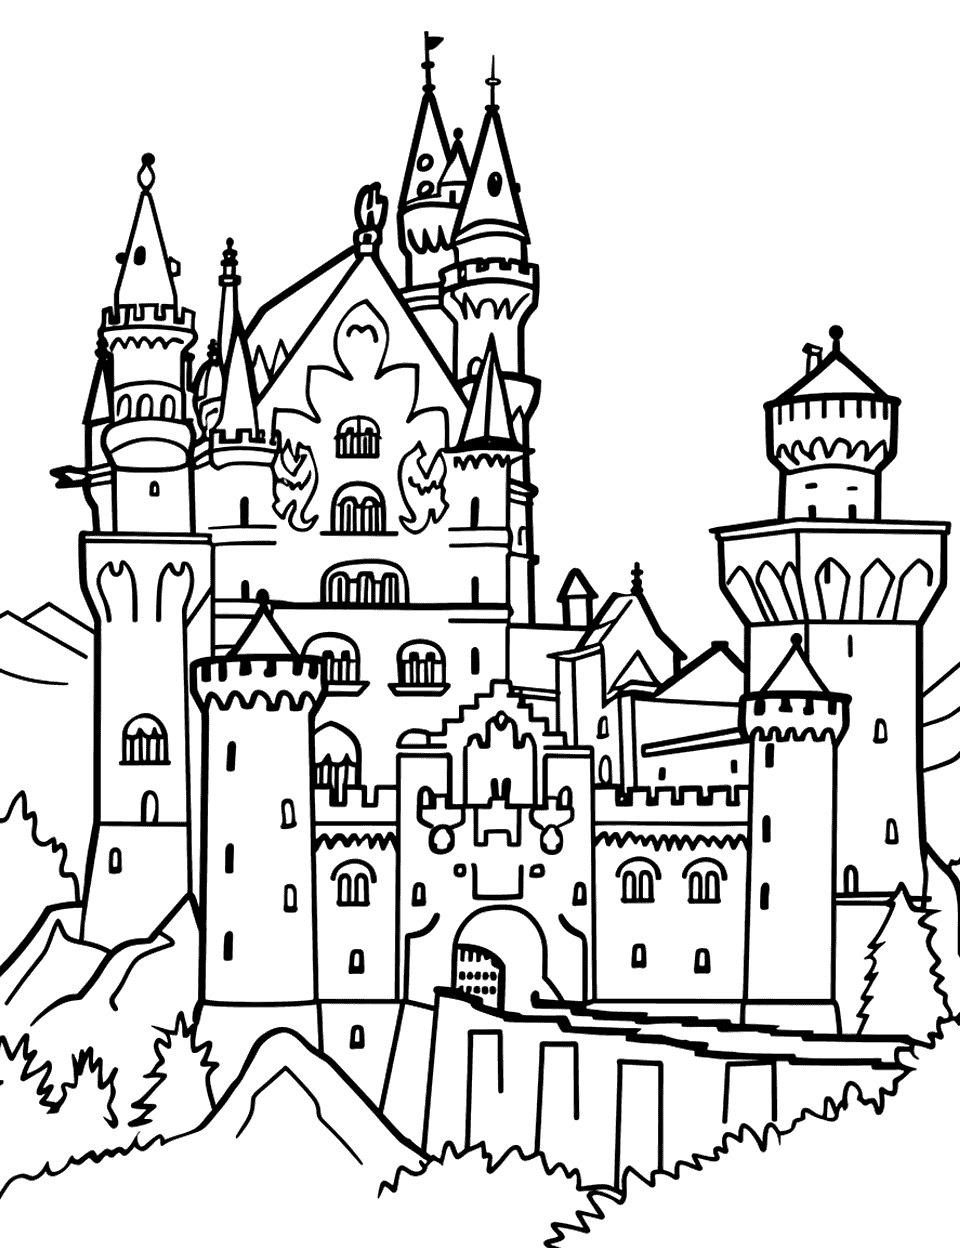 Neuschwanstein Castle View Coloring Page - A majestic view of the Neuschwanstein Castle perched on a rugged hill.